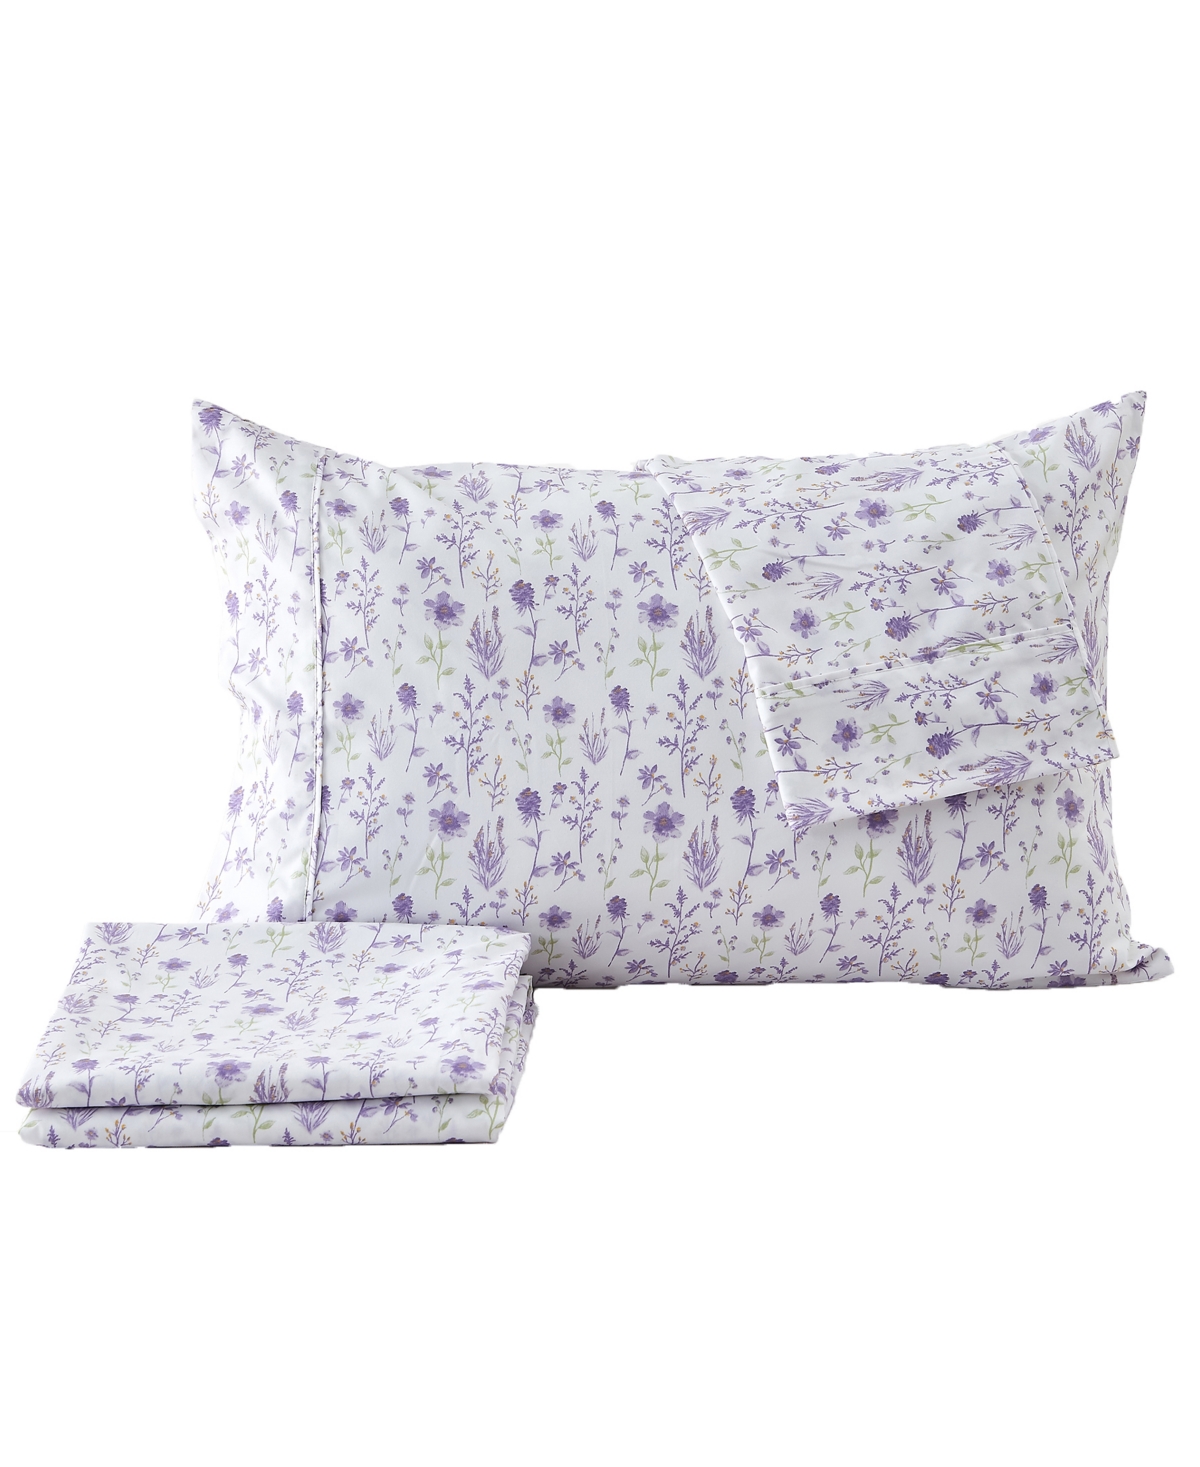 Premium Comforts Floral Microfiber Printed 3 Piece Sheet Set, Twin In Colorful Floral - Lavender